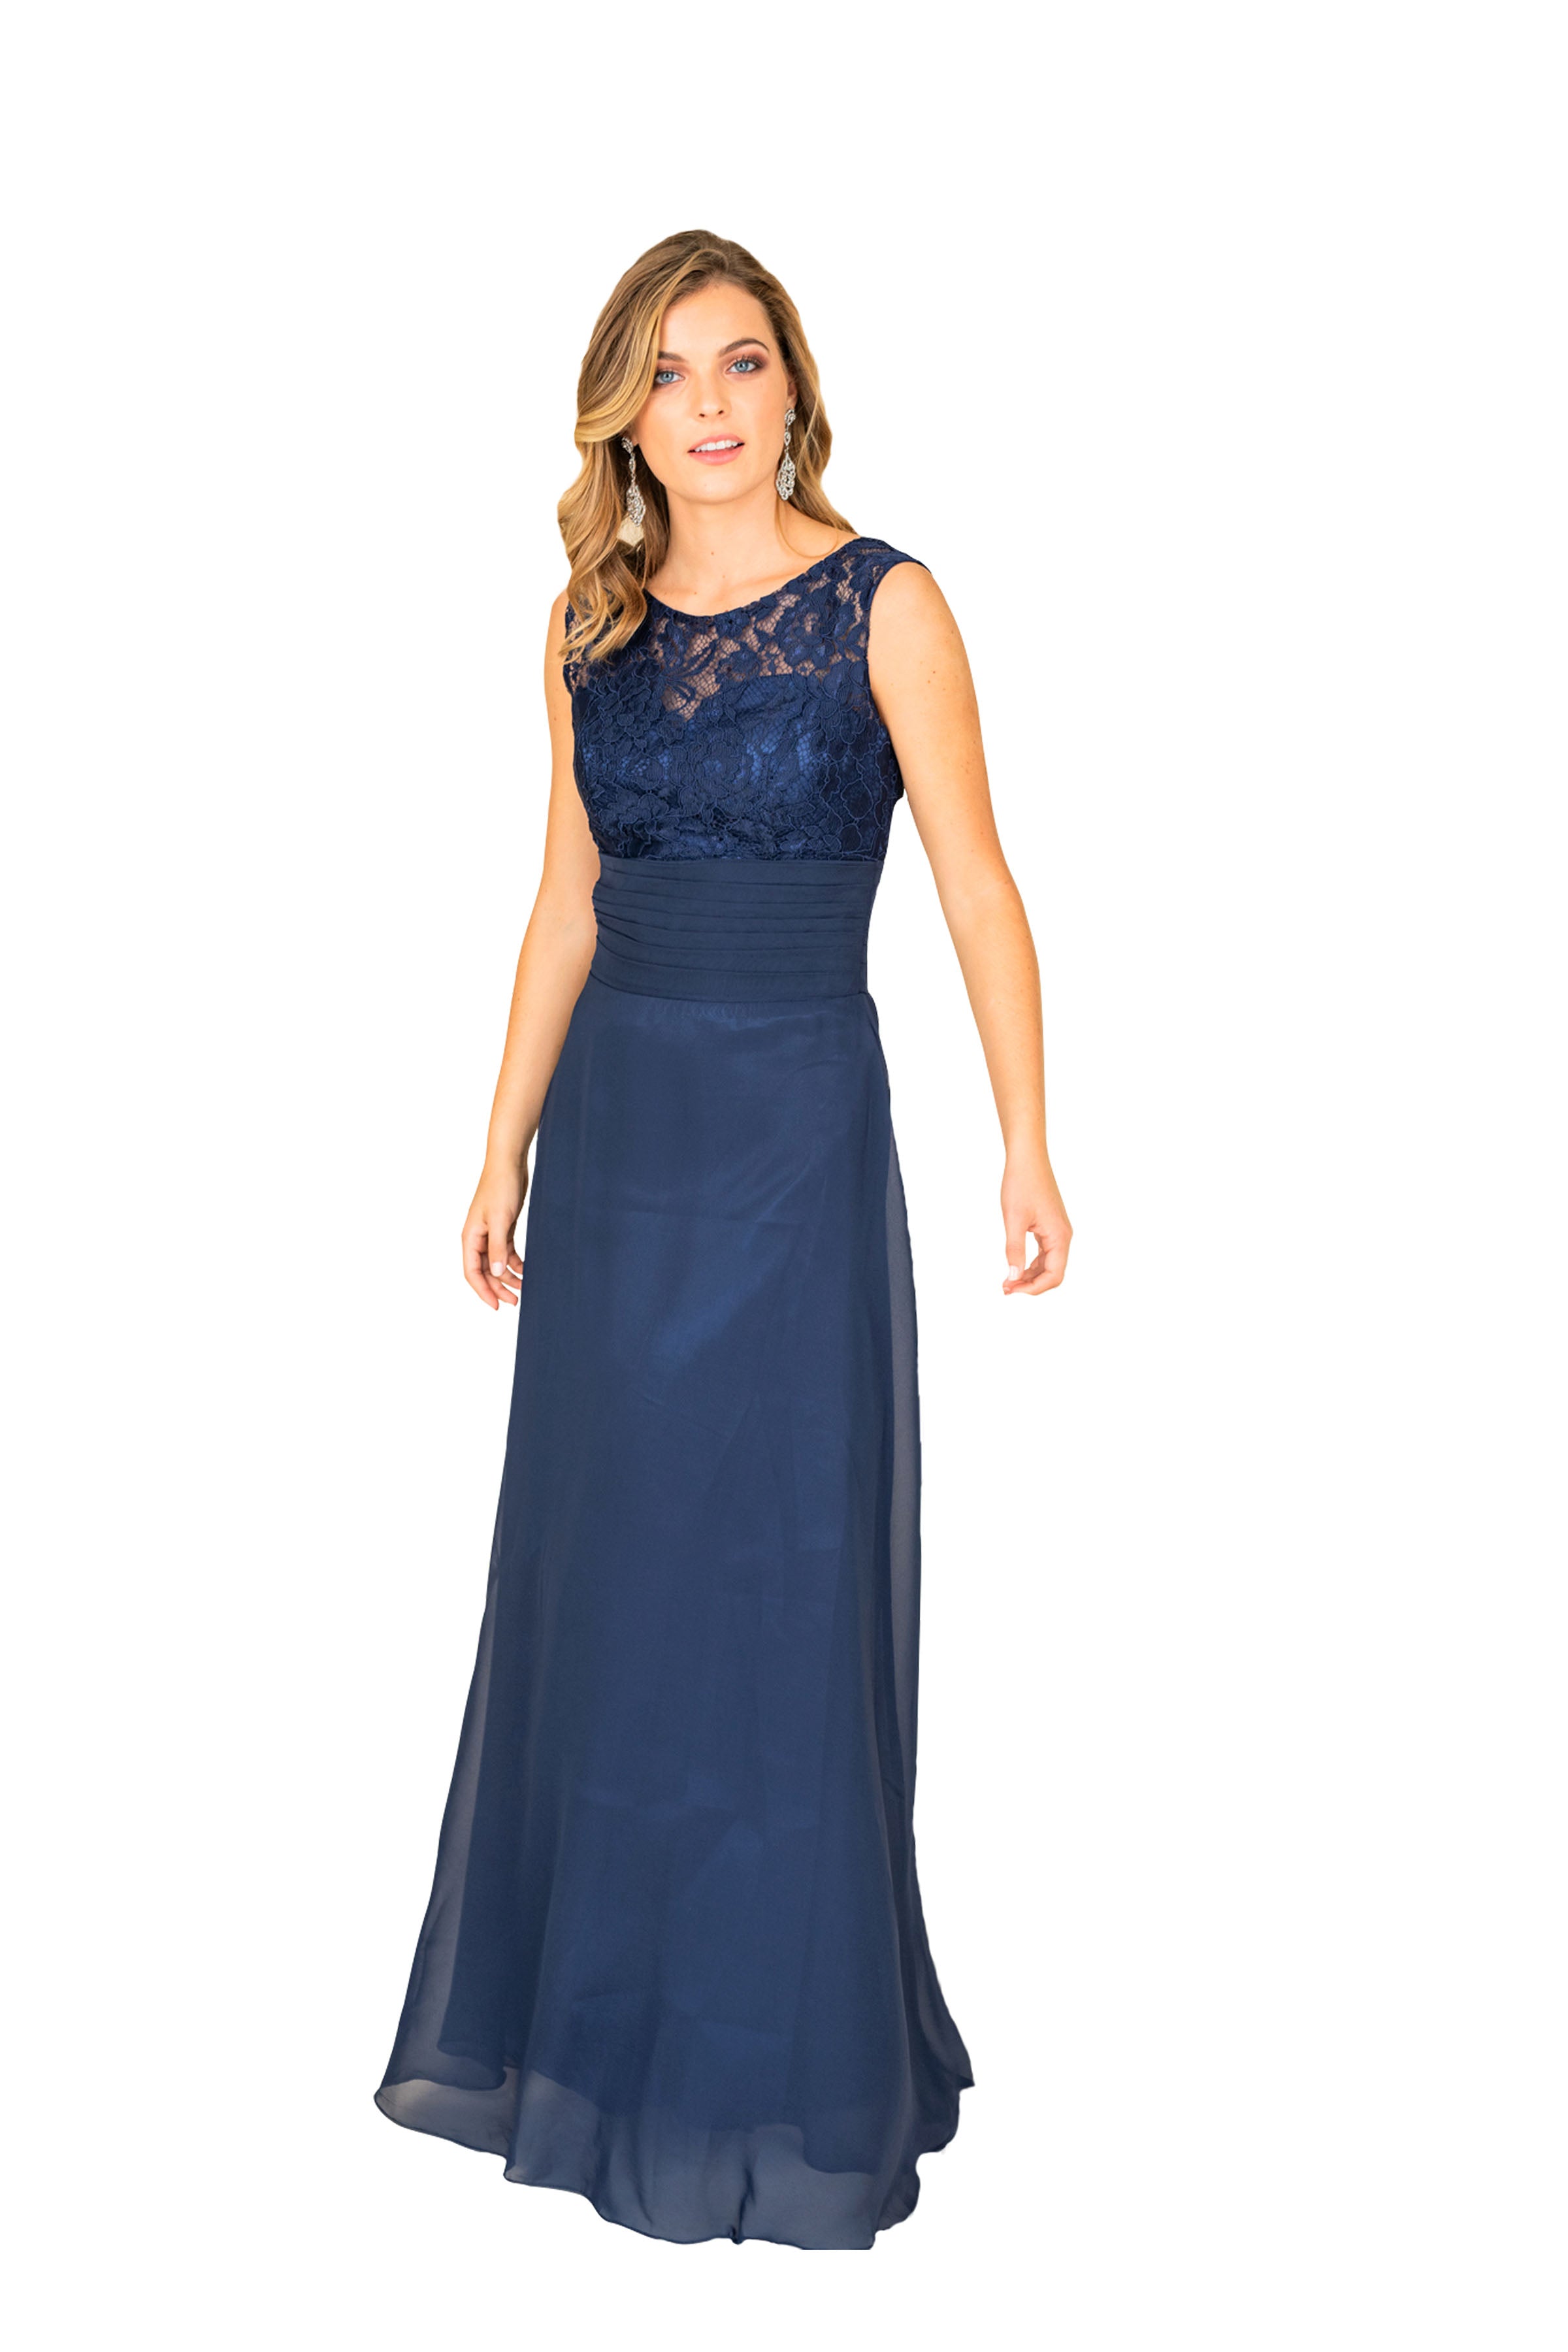 Buy IMPRESSION Gowns, Women Gowns, Latest Designed Women Dress Gown Printed  Gowns for Women| (XX-Large) Blue at Amazon.in